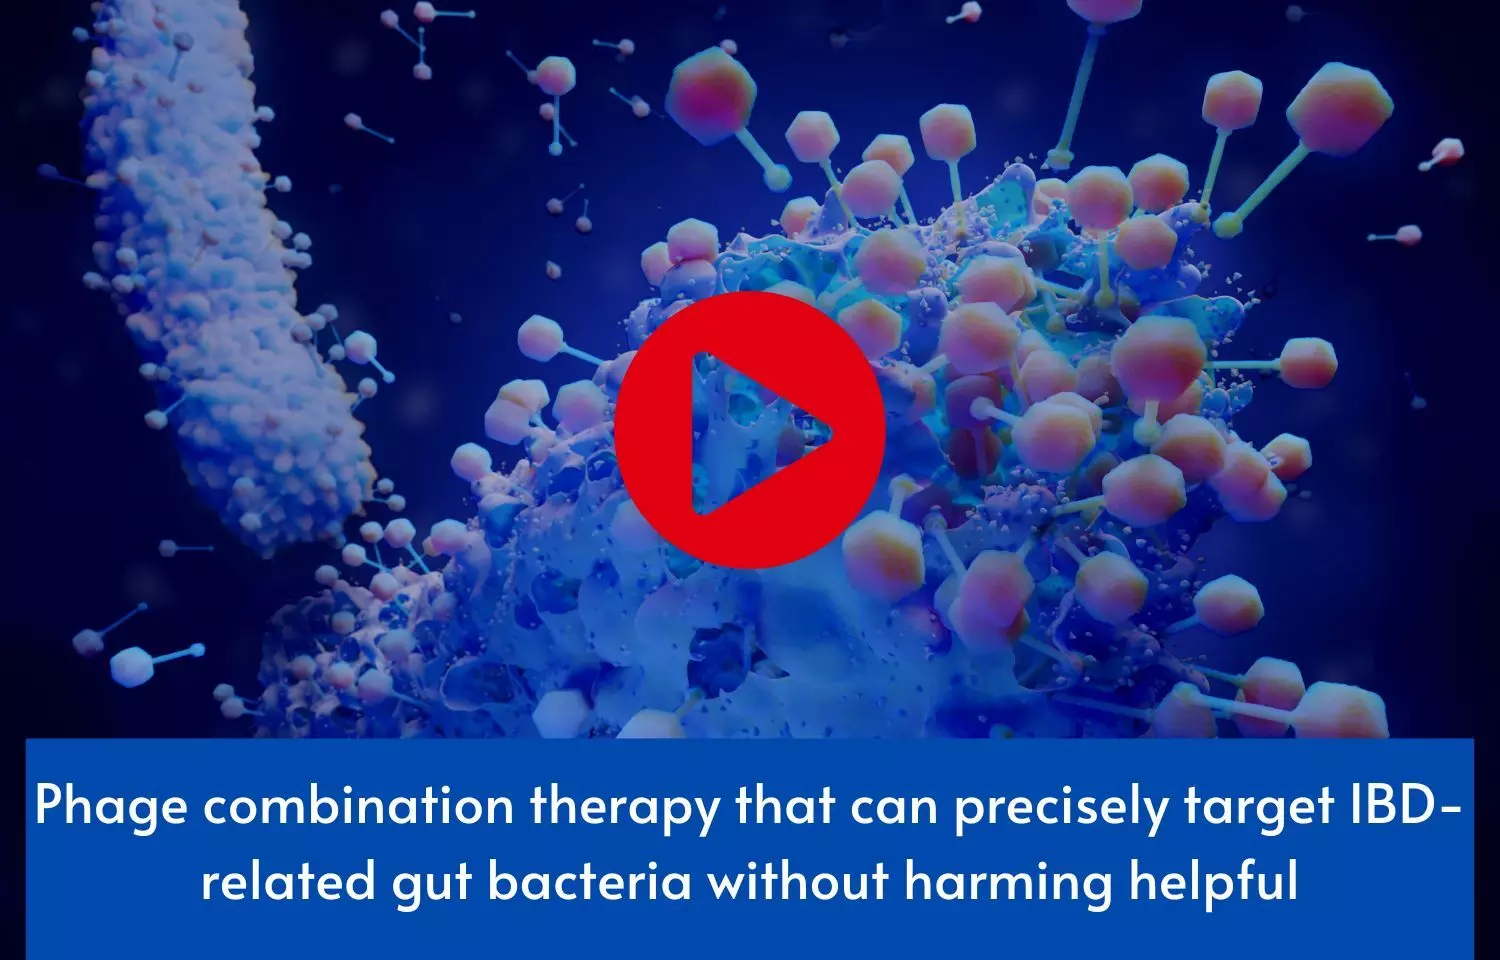 Phage combination therapy that can precisely target IBD-related gut bacteria without harming helpful